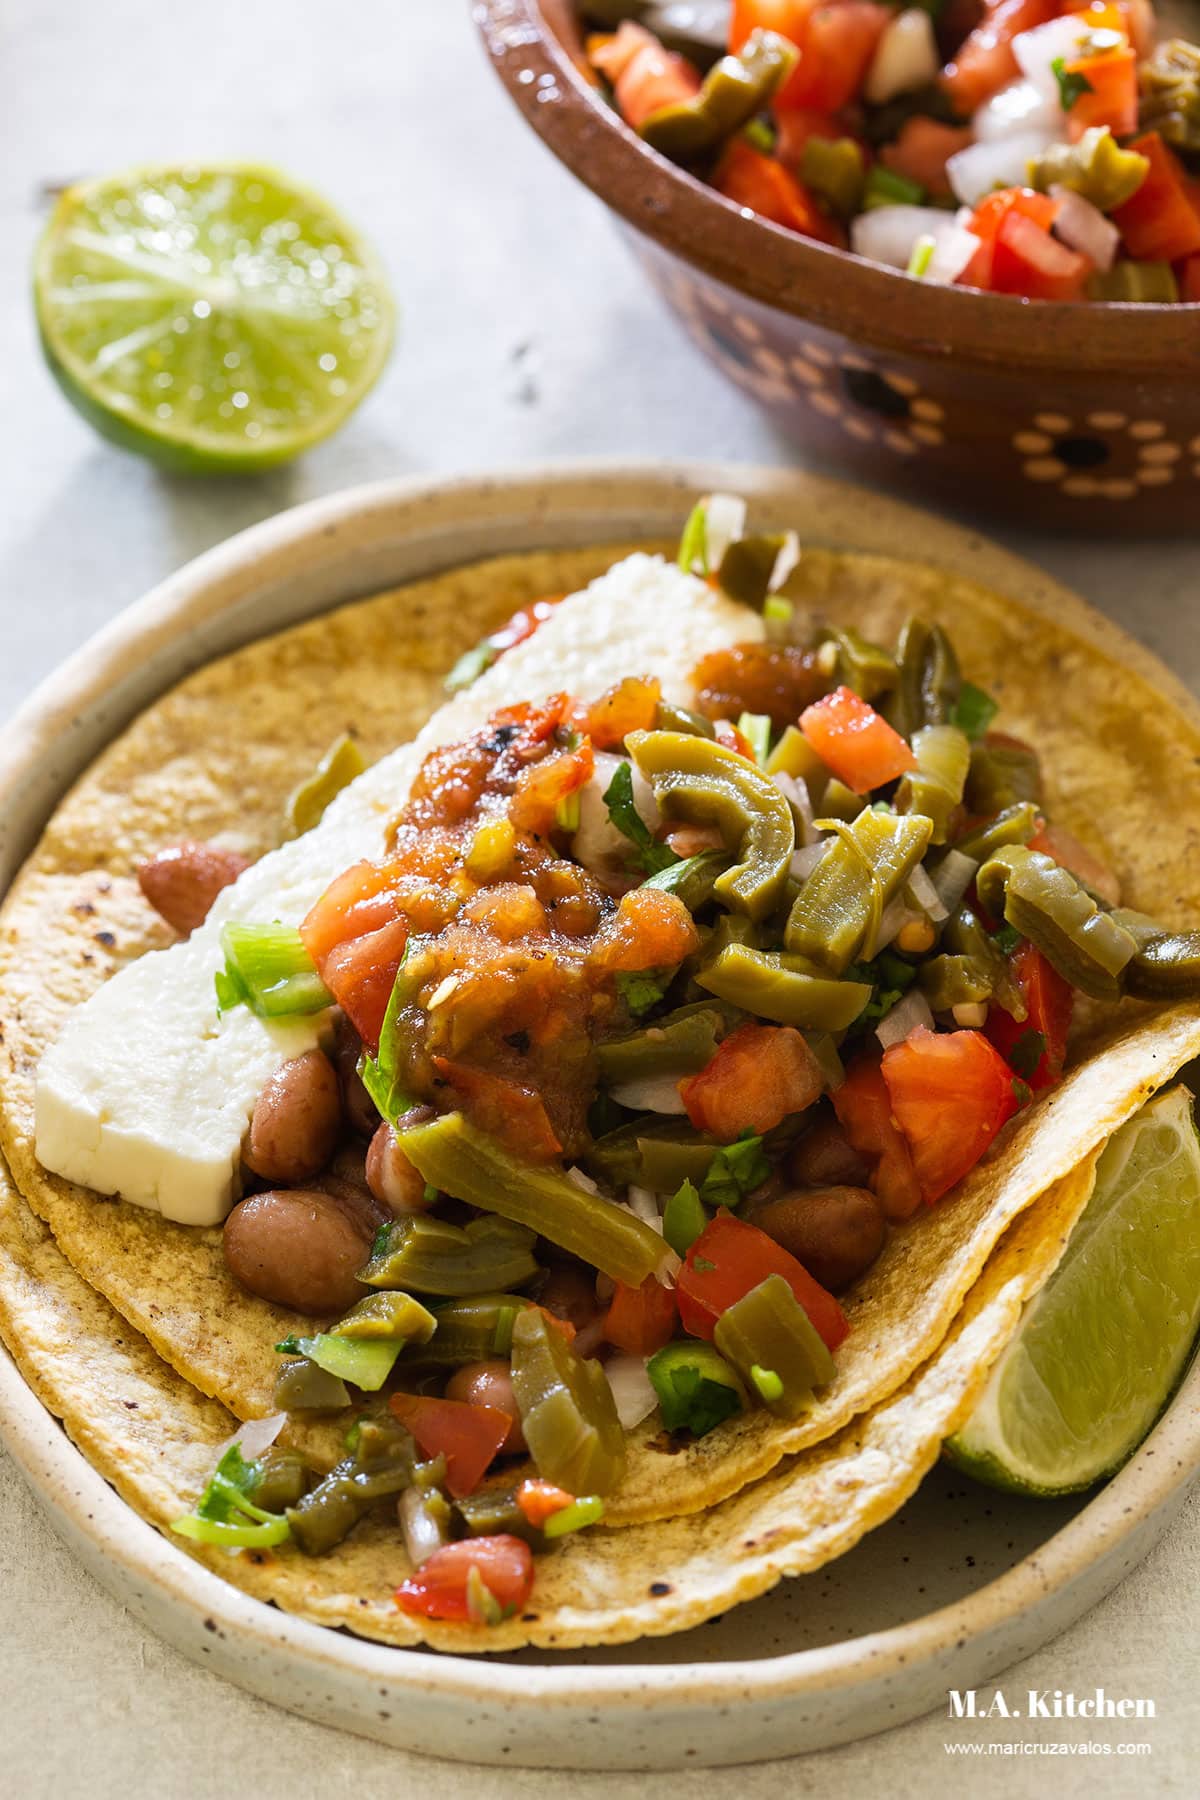 A taco made with corn tortilla, nopales salad, beans, queso fresco and salsa.